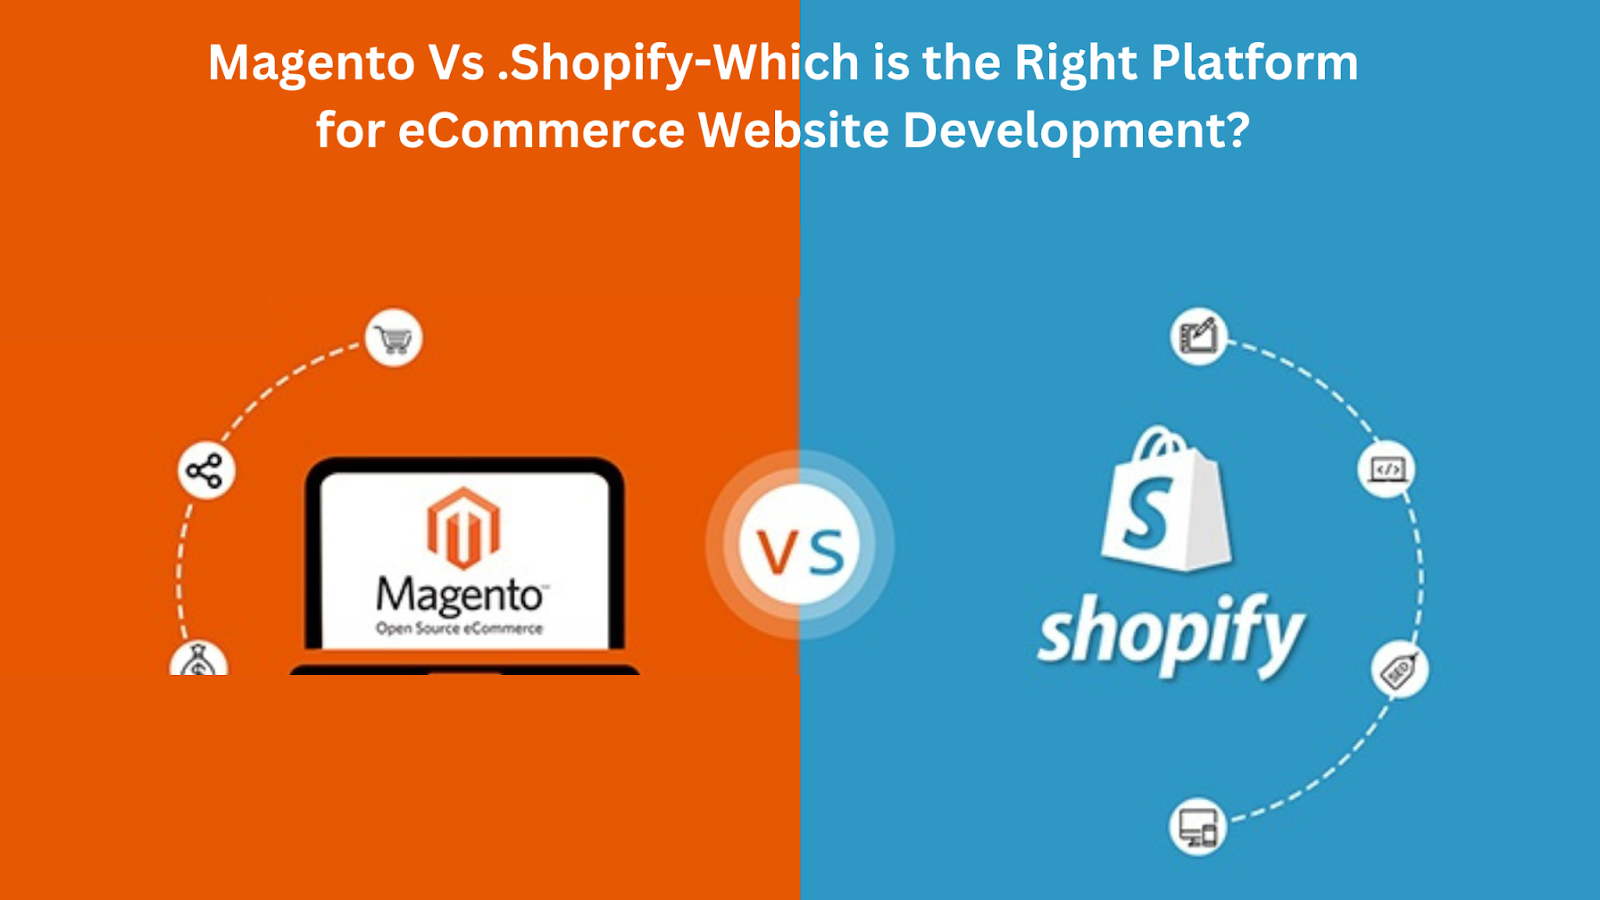 Magento Vs .Shopify-Which is the Right Platform for eCommerce Website Development